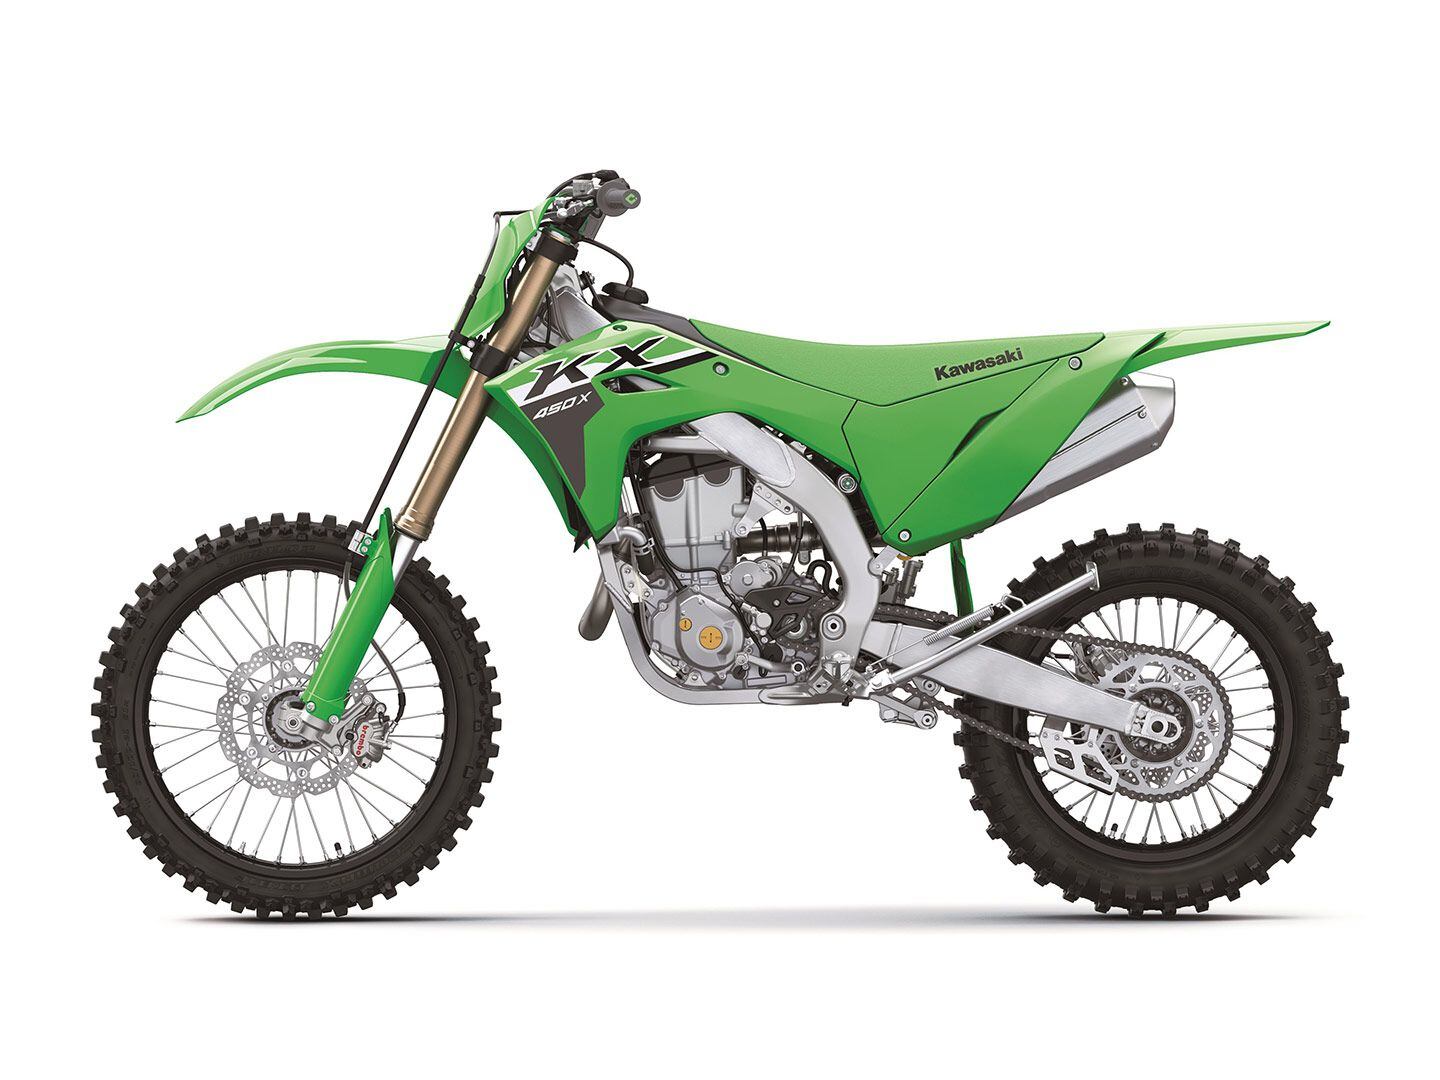 Team Green gave the same overhaul treatment to its flagship cross-country motorcycle. The KX450X retains off-road-focused engine tuning, suspension settings, and features, as well as Dunlop Geomax AT81 tires.